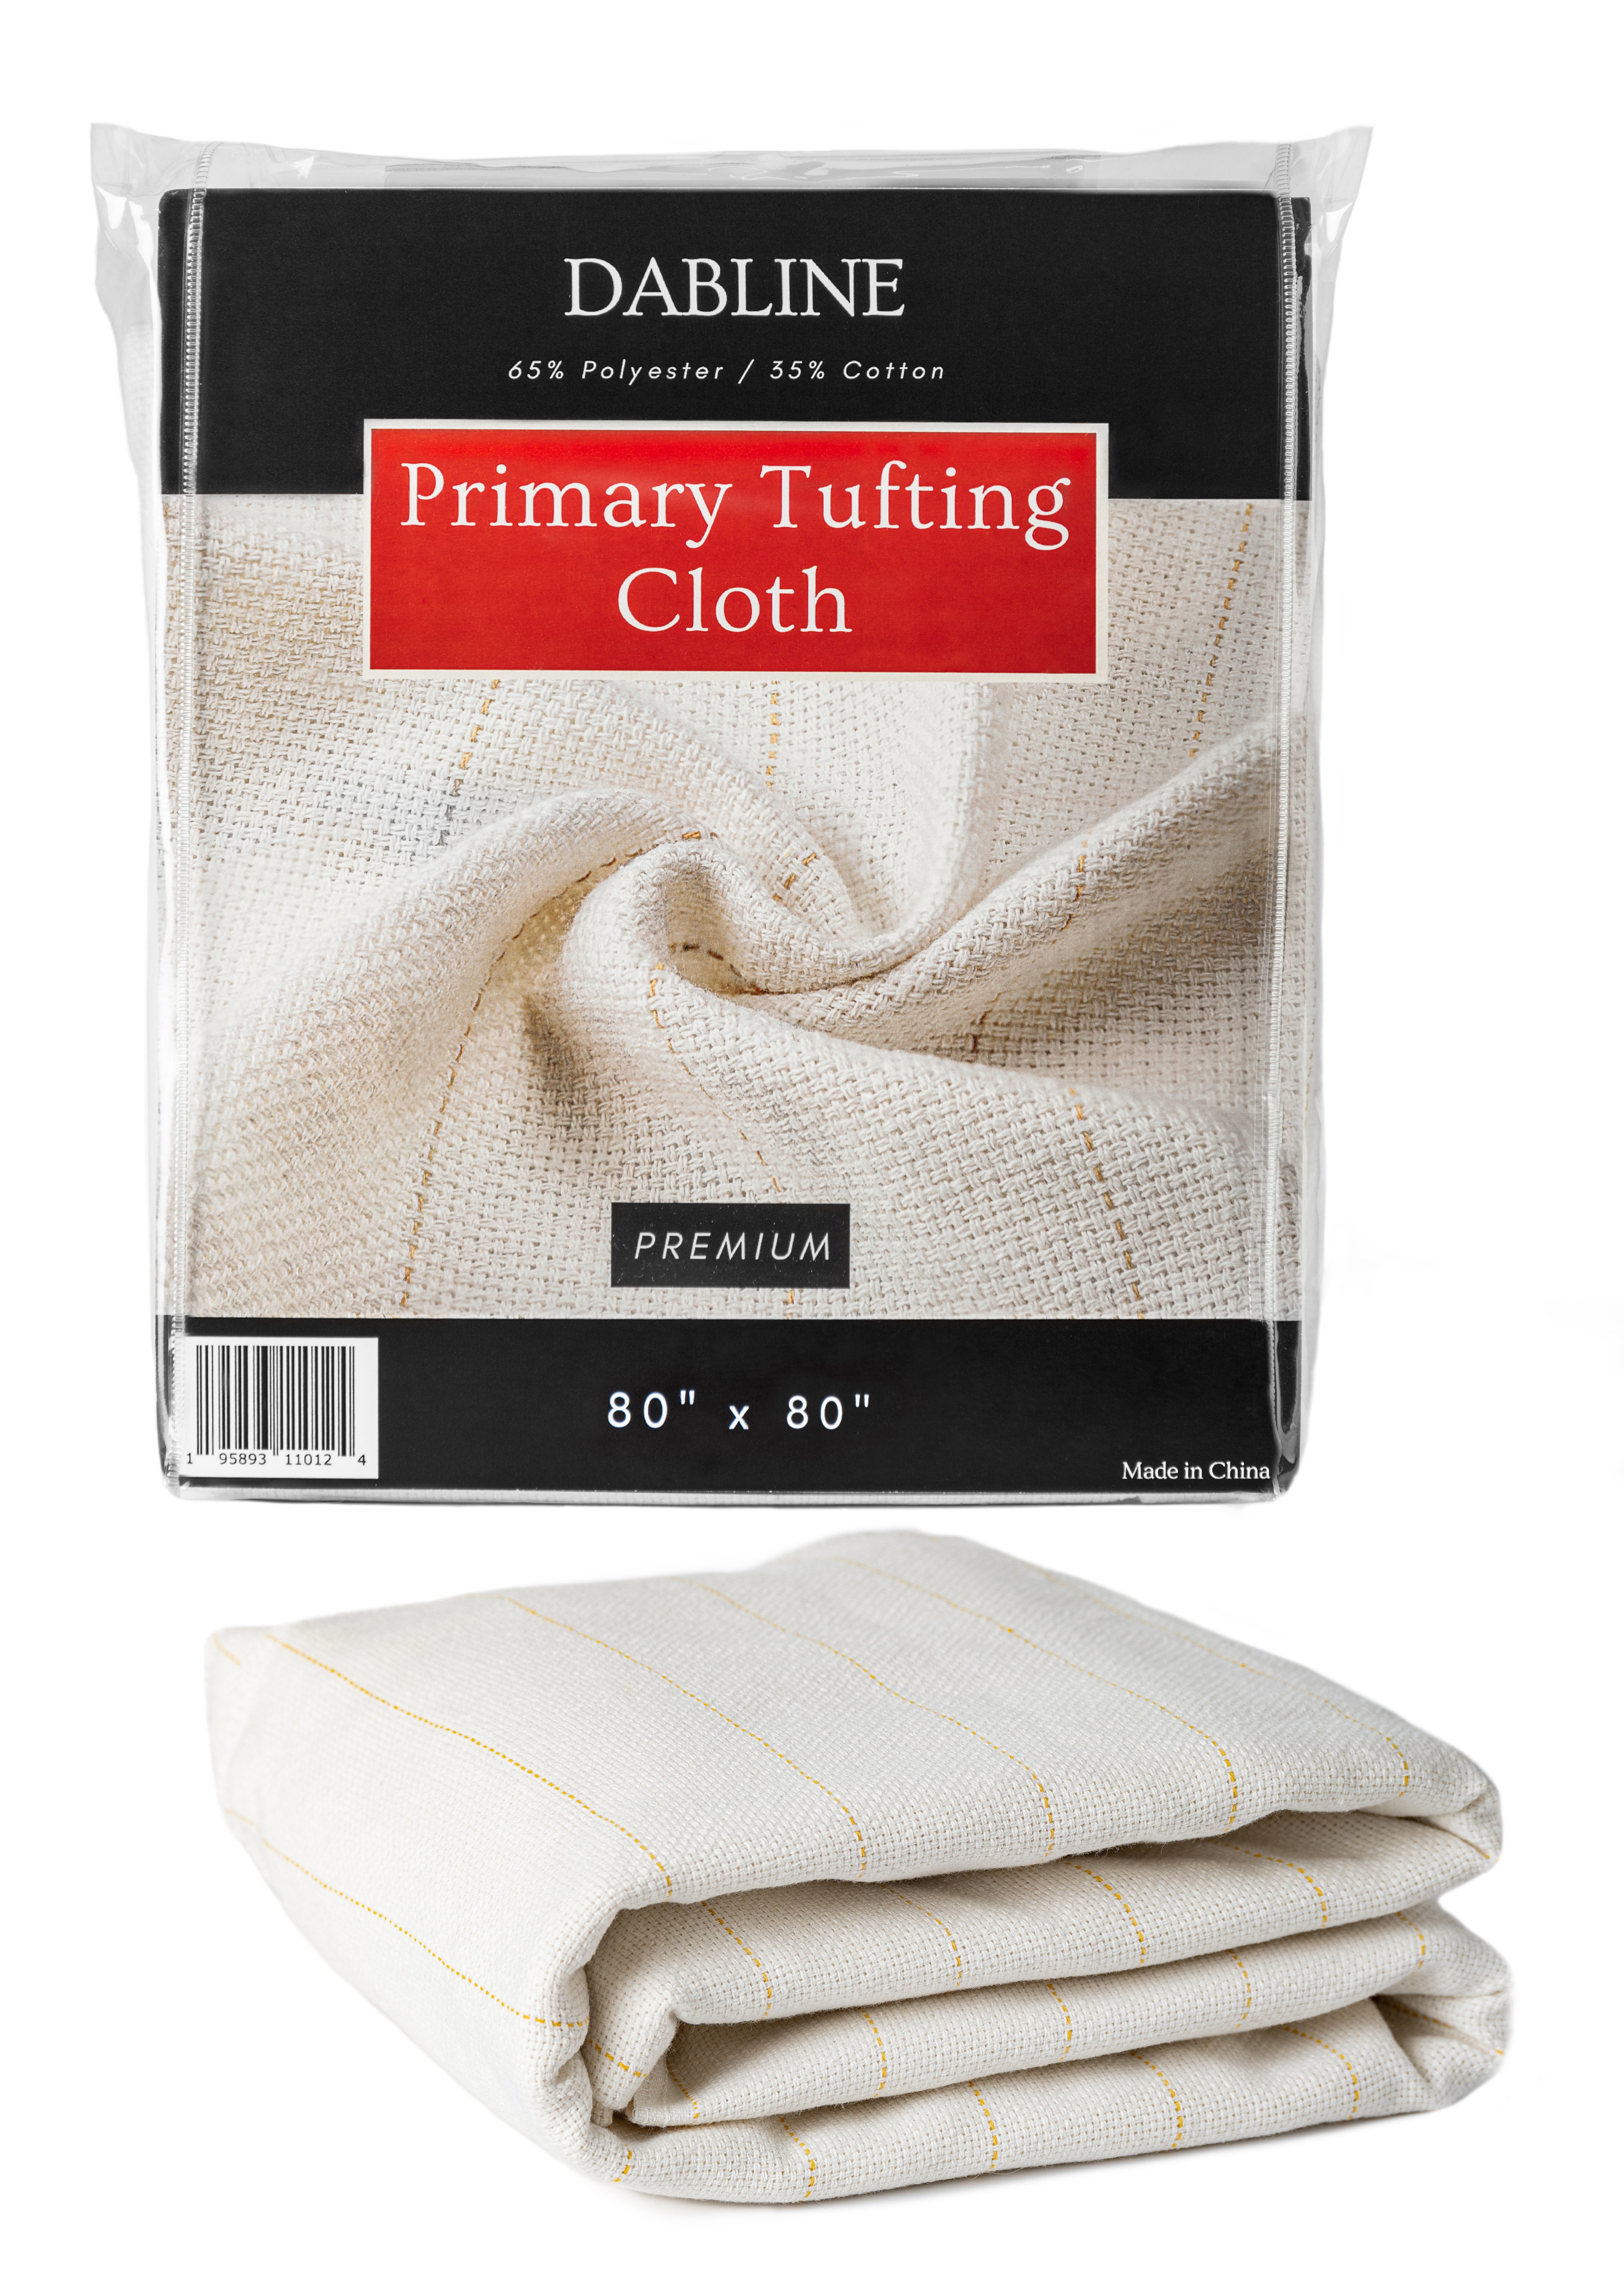 DABLINE 80 x 80 Primary Tufting Cloth for Rug Making and Punch